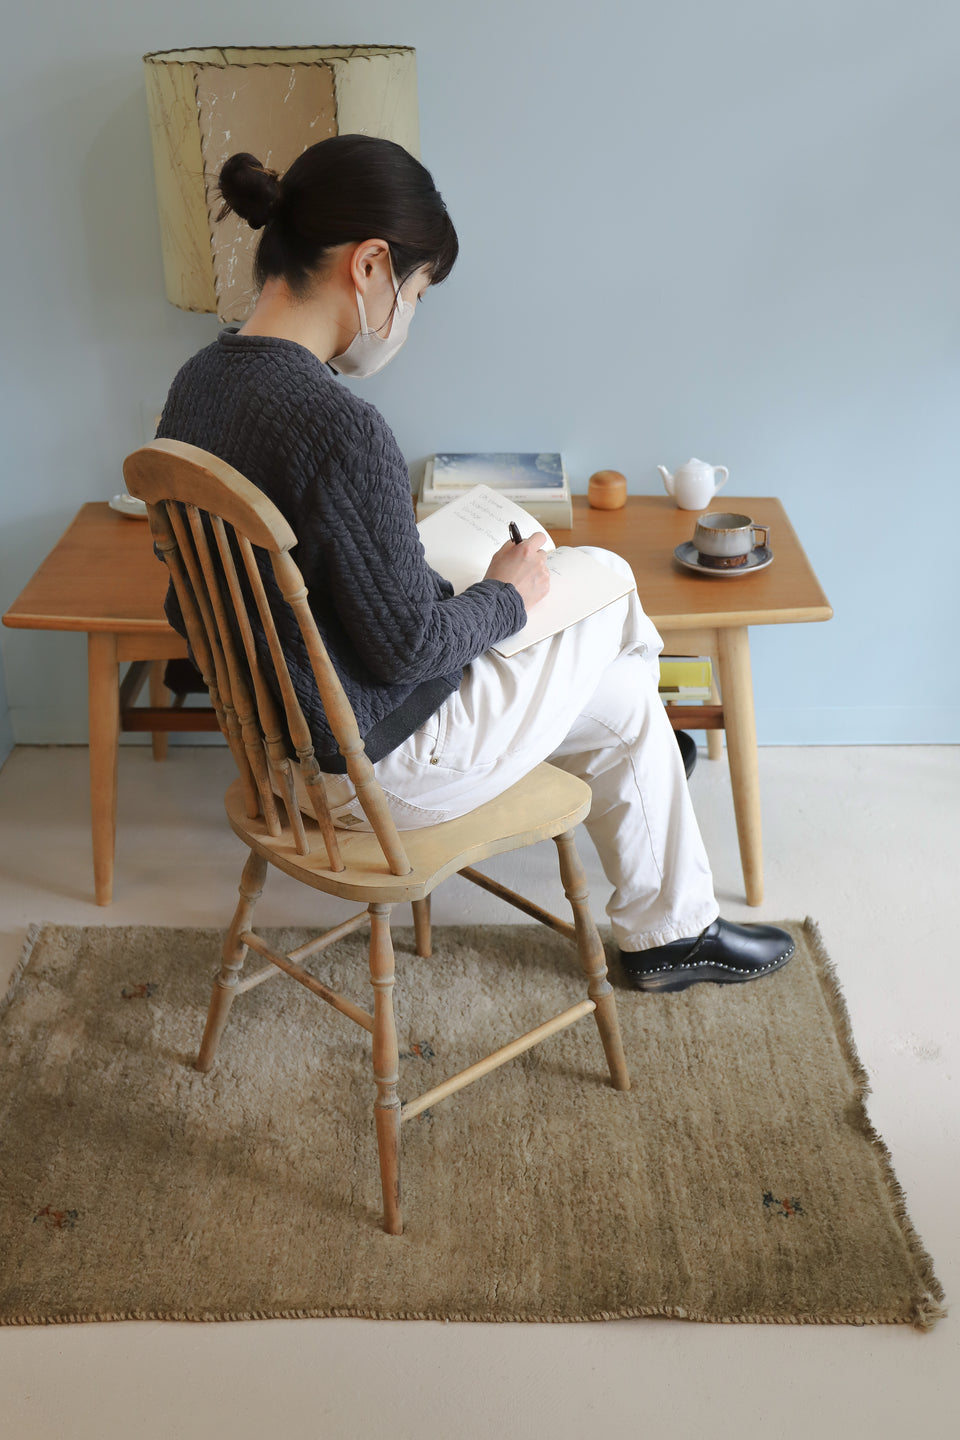 Antique Windsor Chair/アンティーク ウィンザーチェア ダイニングチェア 椅子 シャビーシック